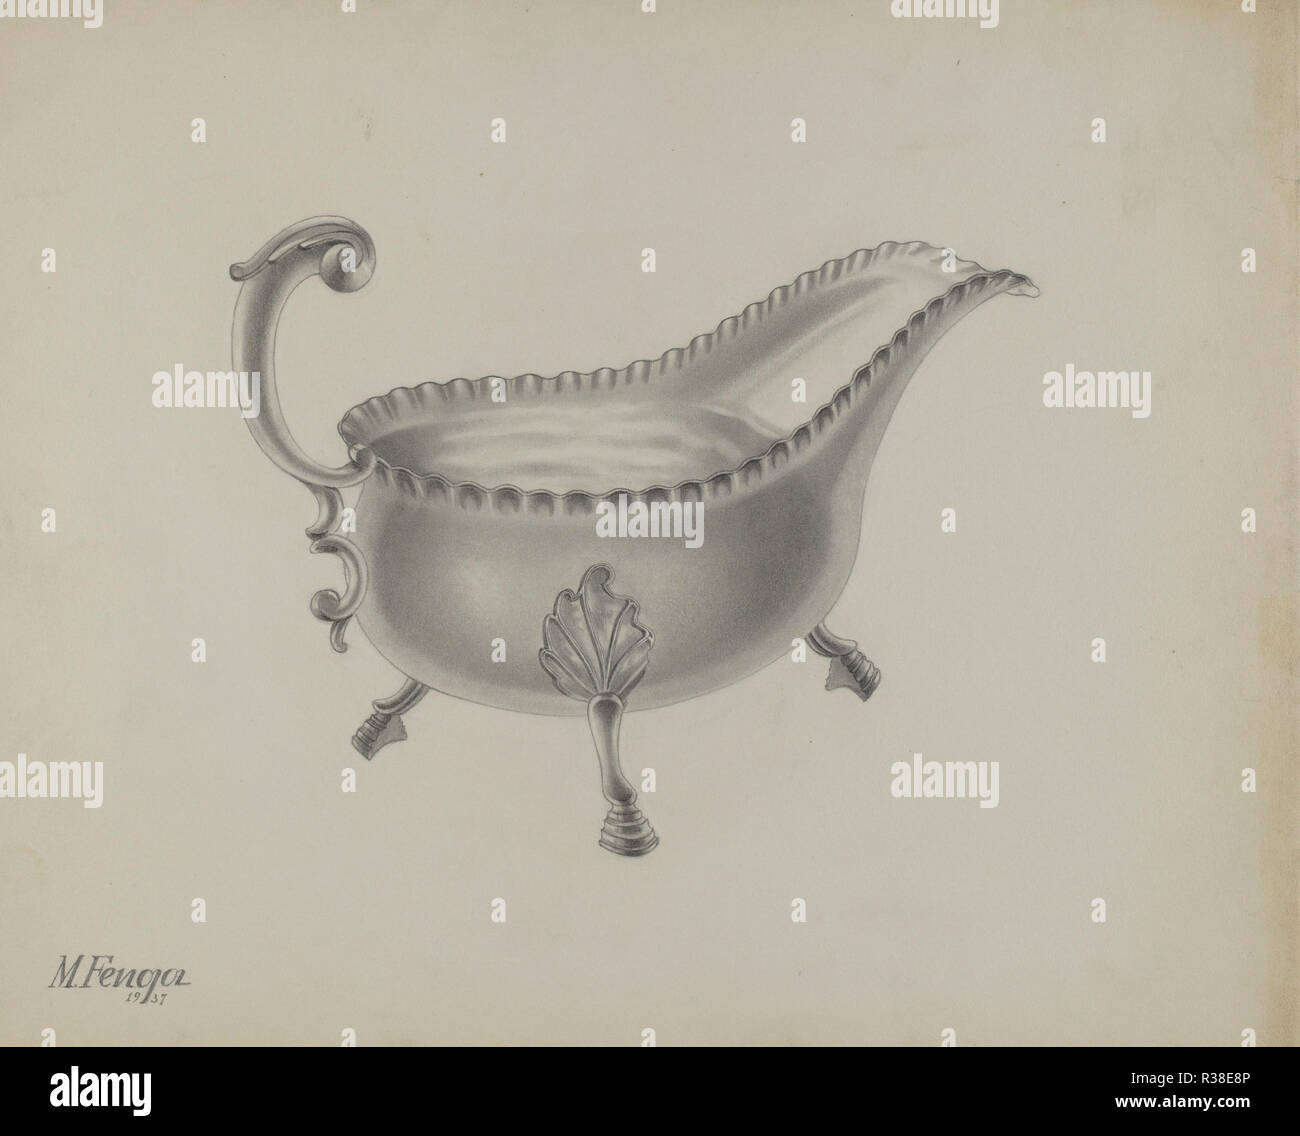 Silver Sauce Boat. Dated: 1937. Dimensions: overall: 22.7 x 28.9 cm (8 15/16 x 11 3/8 in.)  Original IAD Object: 5' high; 8 5/8' long; 3 7/8' wide. Medium: graphite on paperboard. Museum: National Gallery of Art, Washington DC. Author: Michael Fenga. Stock Photo